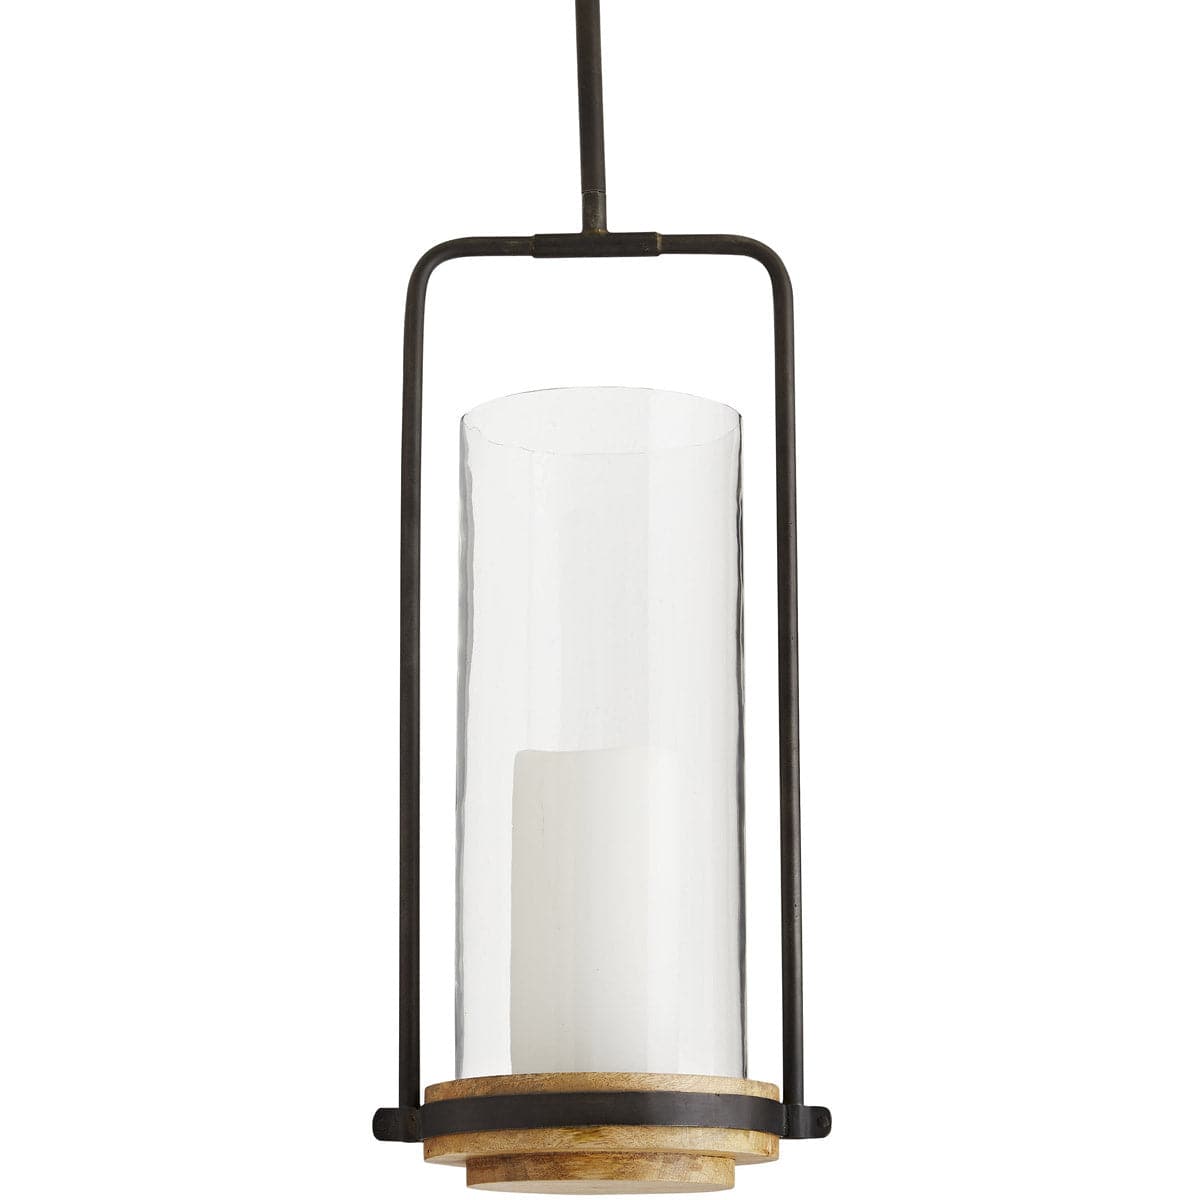 Arteriors - DW42002 - Candle Pendant - Sumter - Clear